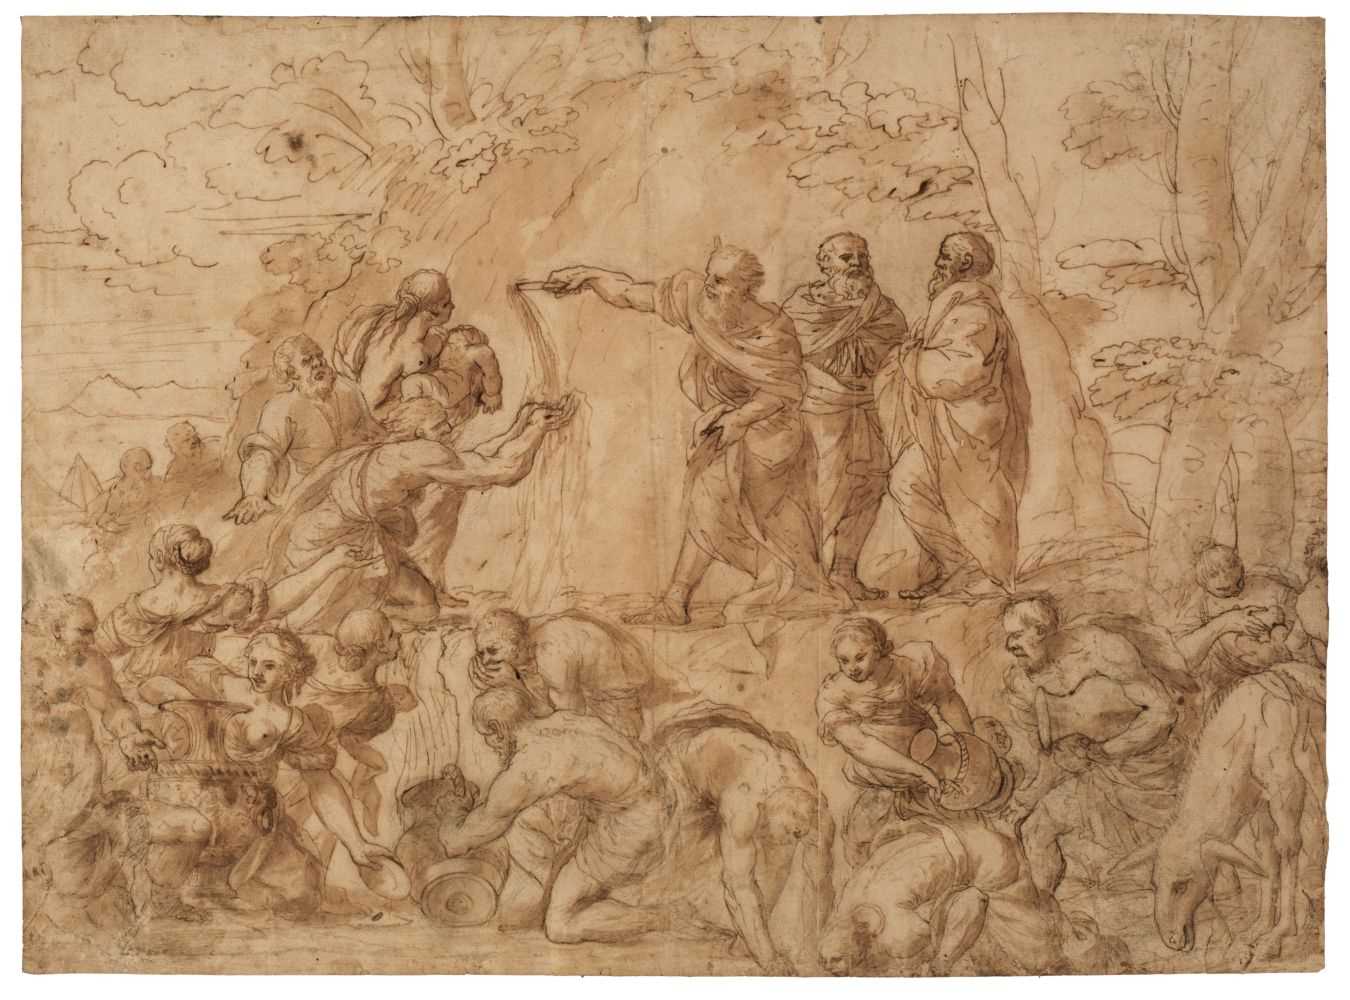 Lot 28 - Romanelli (Giovanni Francesco, 1610-1662, attributed to). Moses striking water from the rock